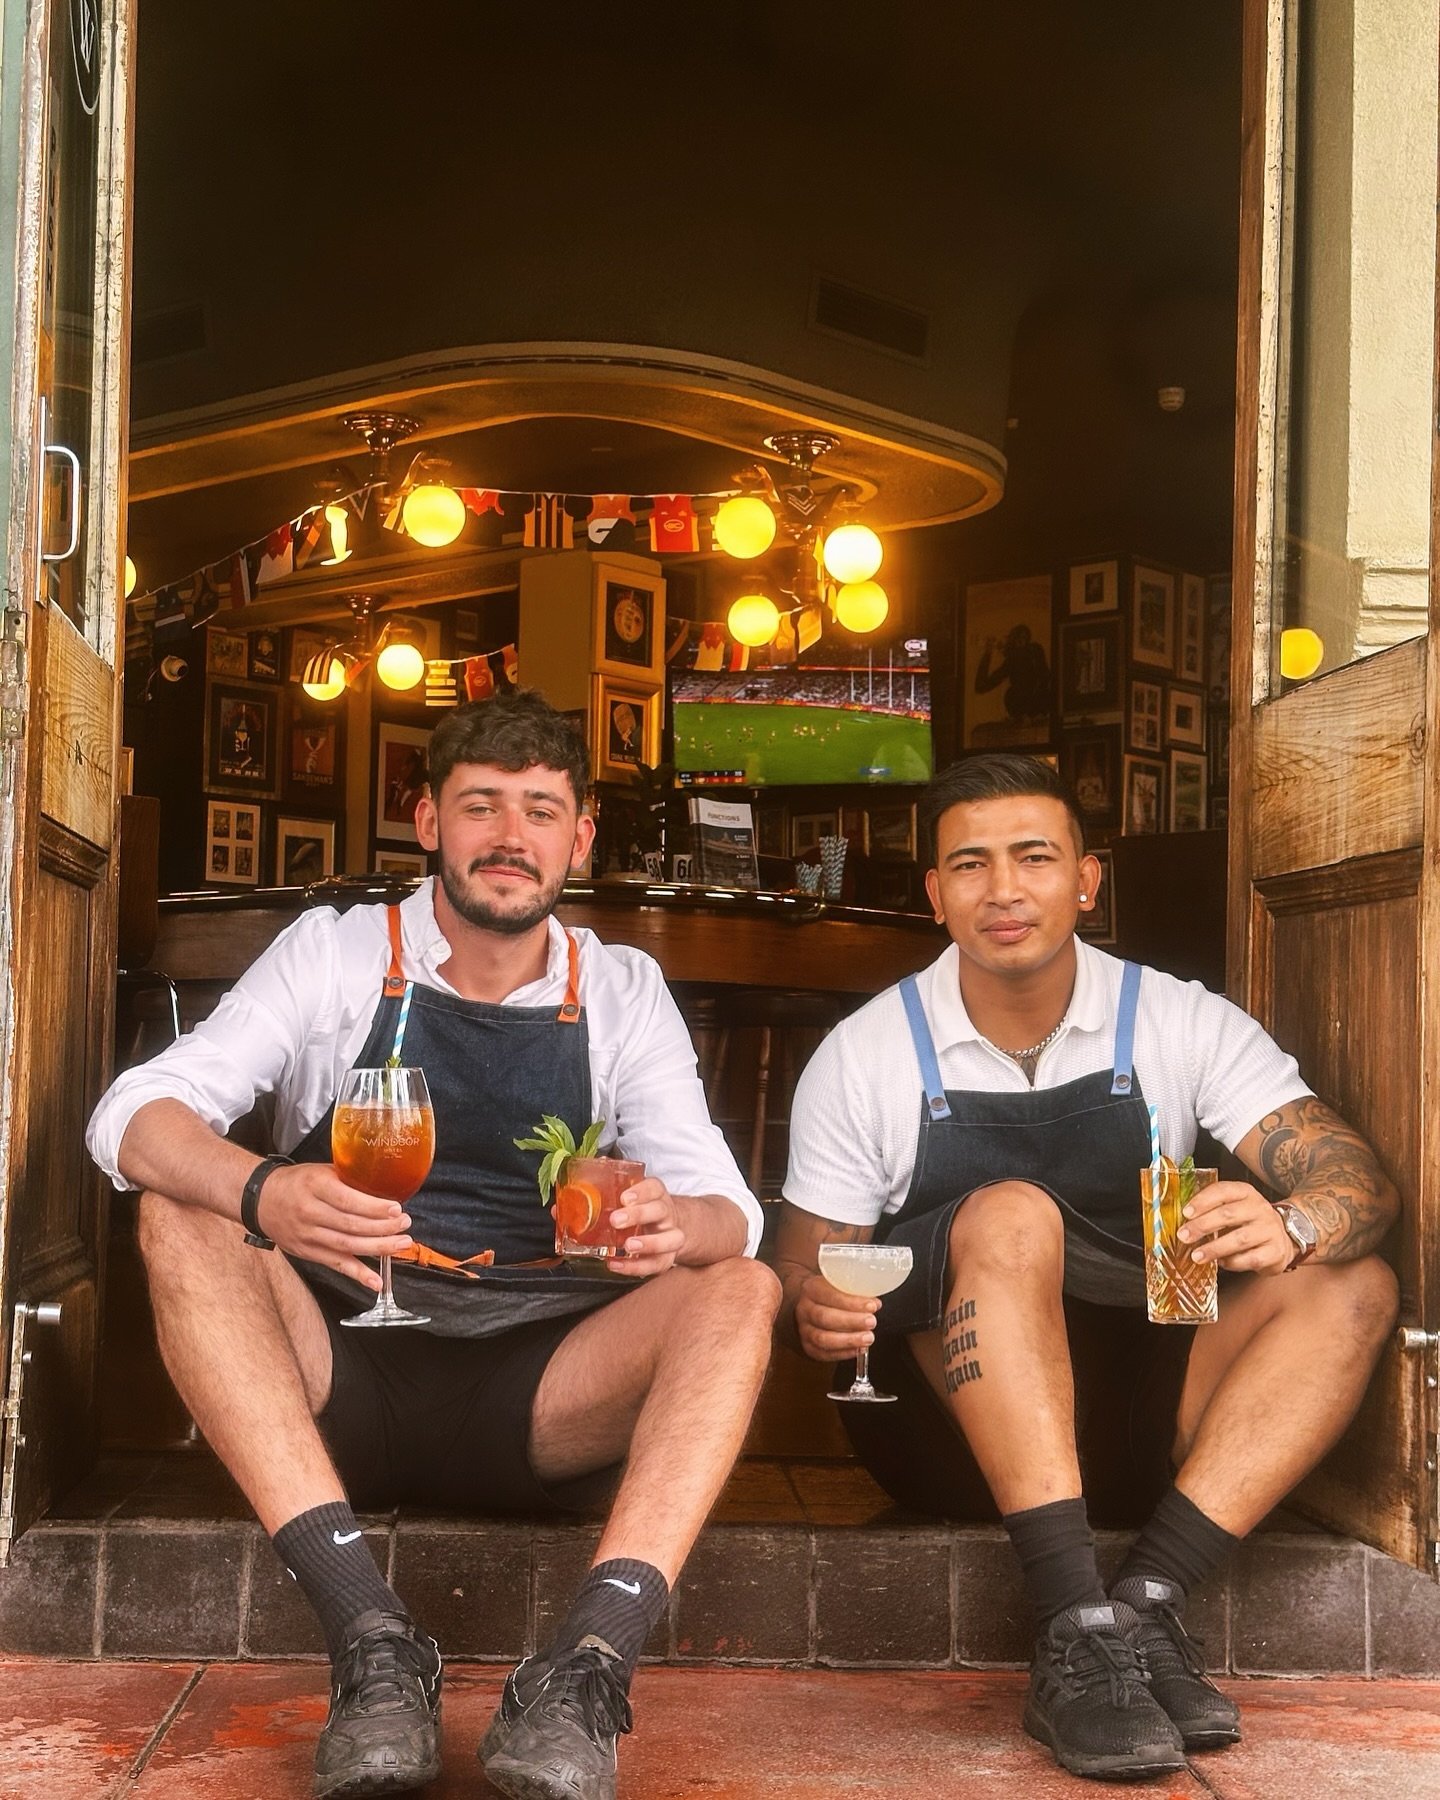 Oran &amp; Laven are shakin&rsquo; things up this weekend! 🍹 

Our new cocktails are making an appearance on our menus and we&rsquo;re so excited to share them with you. 

Pop down to try our Coconut Margarita, Sloe Berry Collin&rsquo;s, Windsor Sto